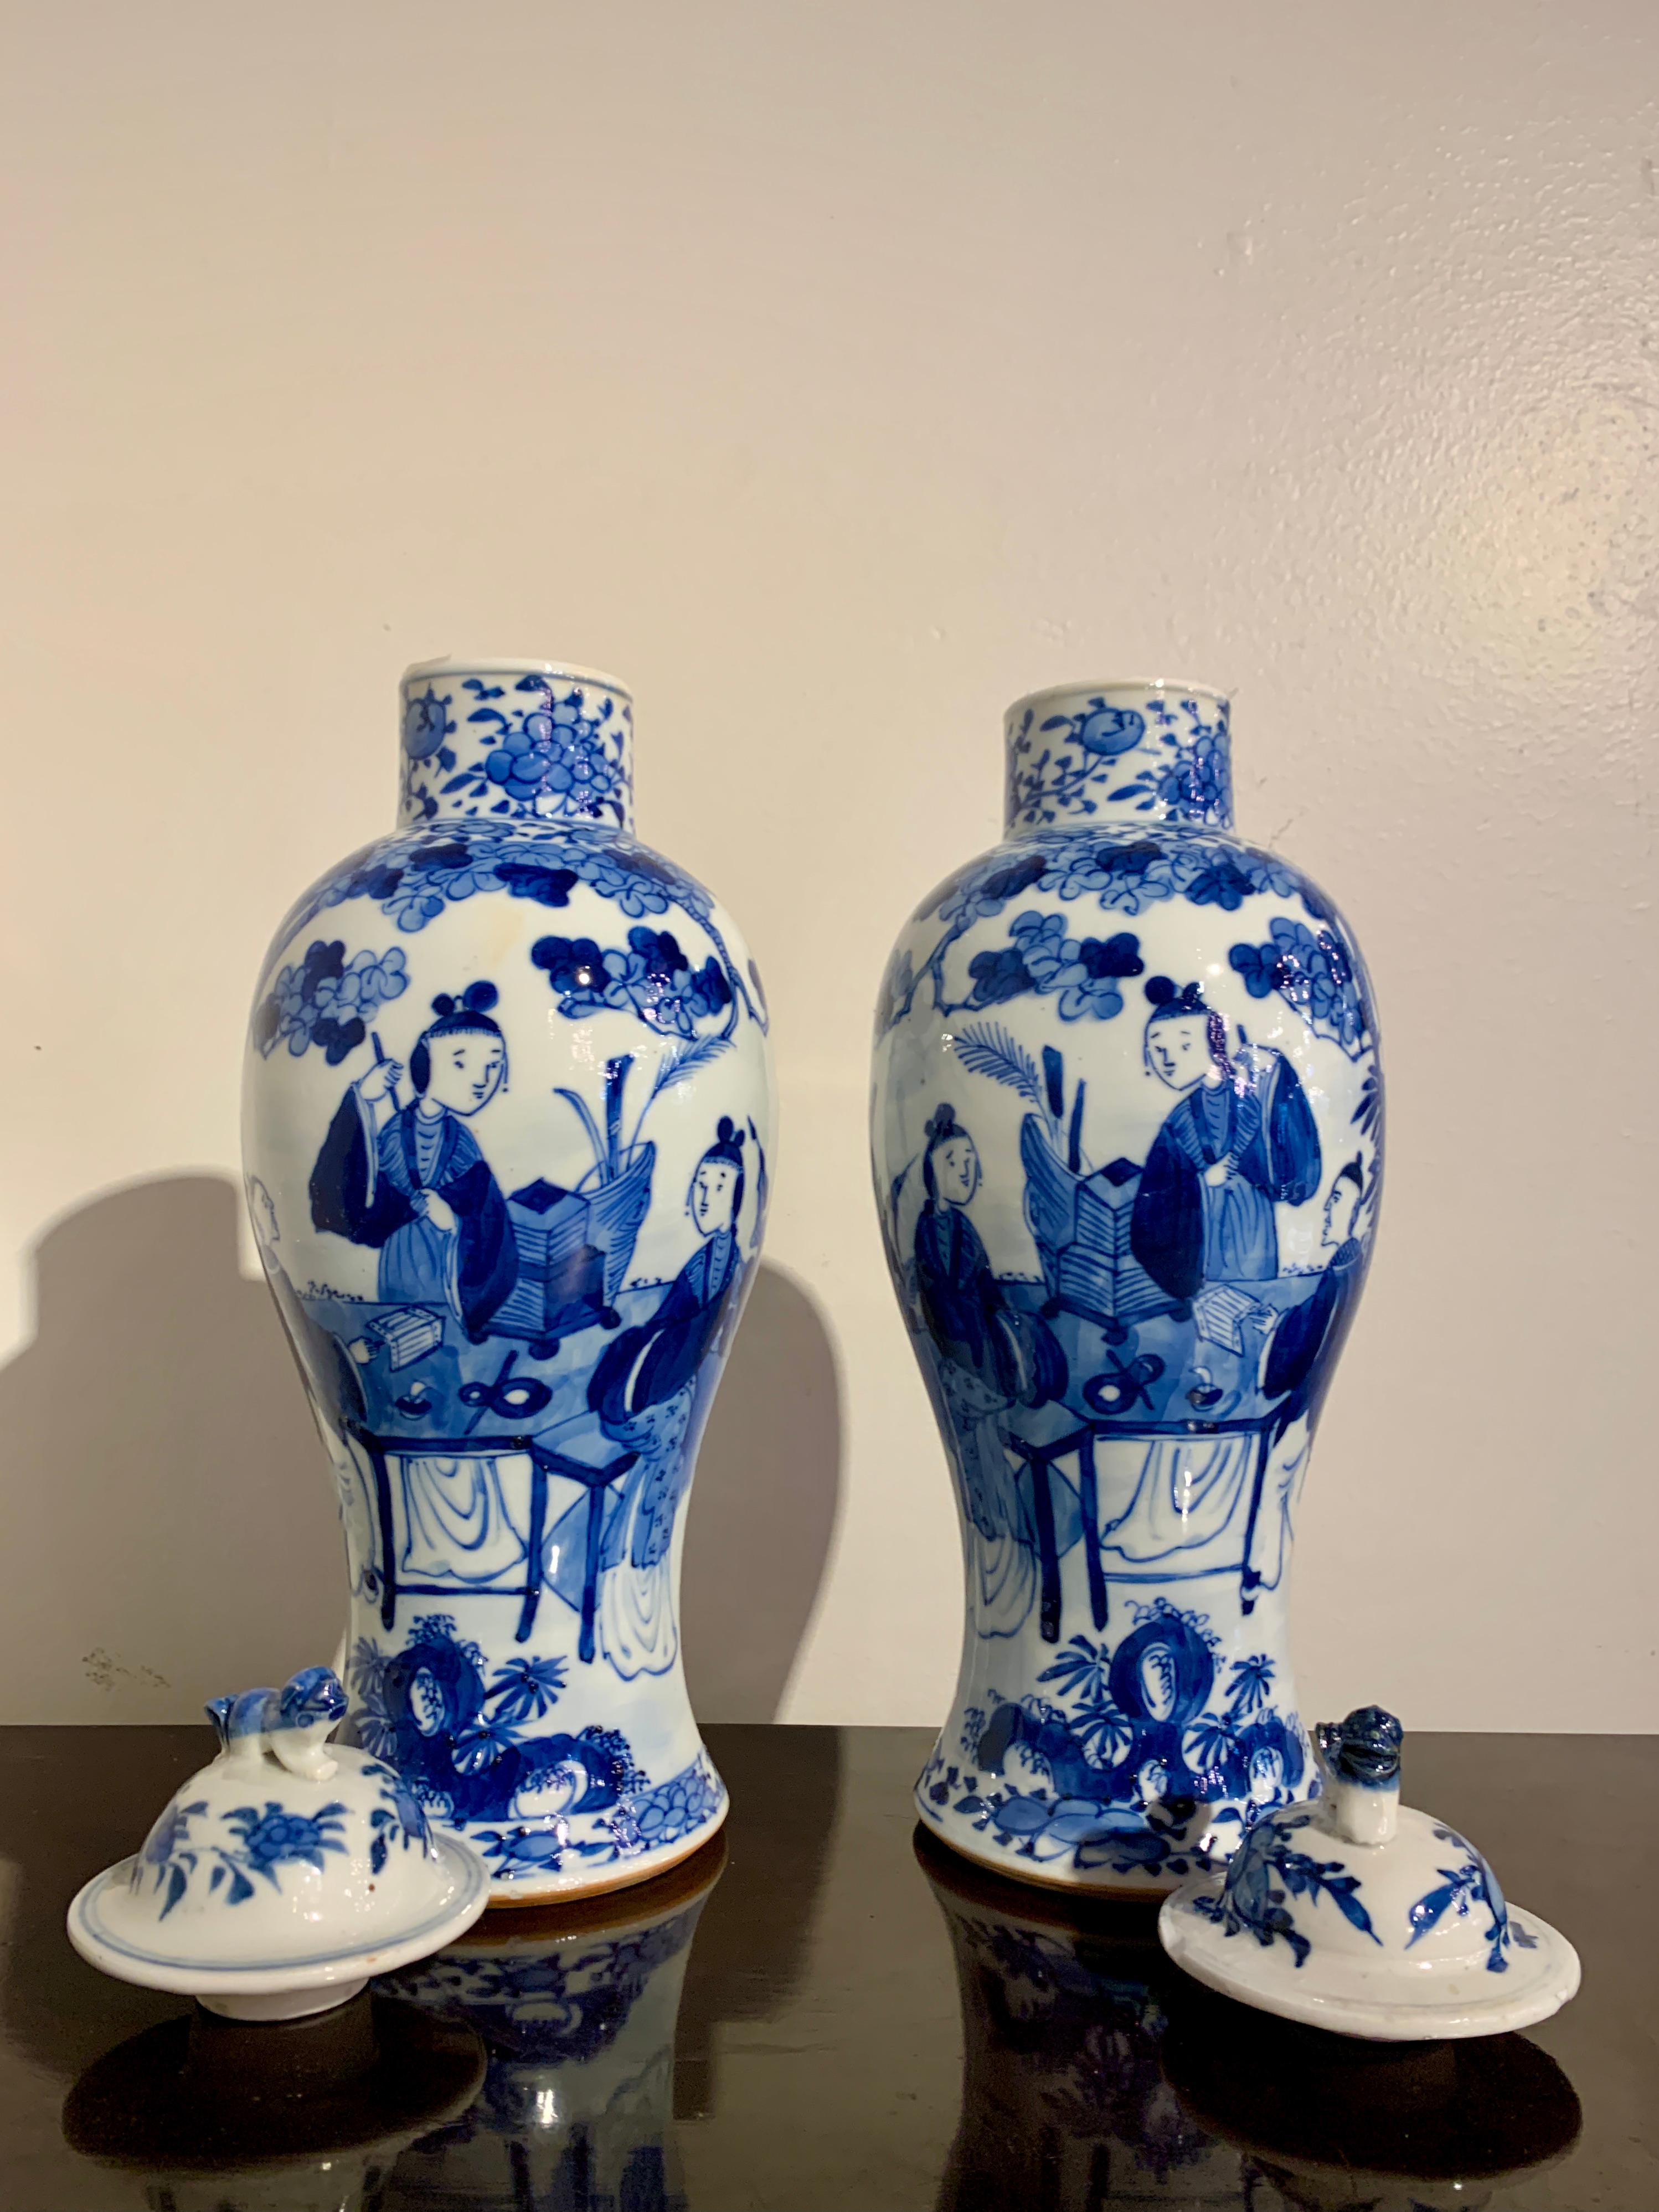 Porcelain Pair Chinese Blue and White Covered Baluster Vases, Late 19th Century, China